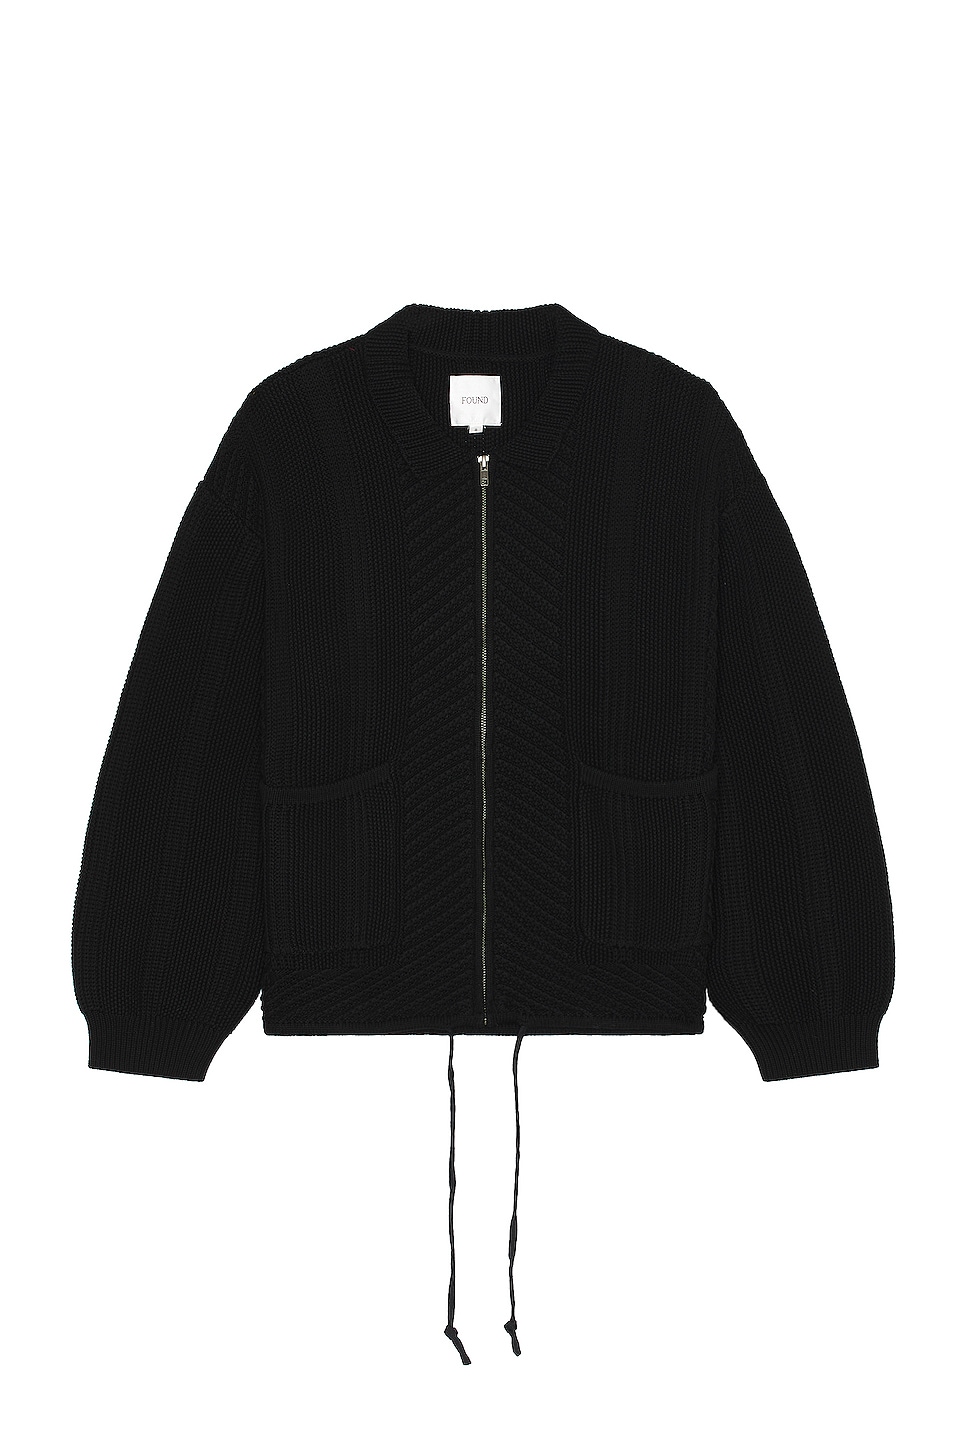 Image 1 of Found Zip Up Panel Sweater in Black